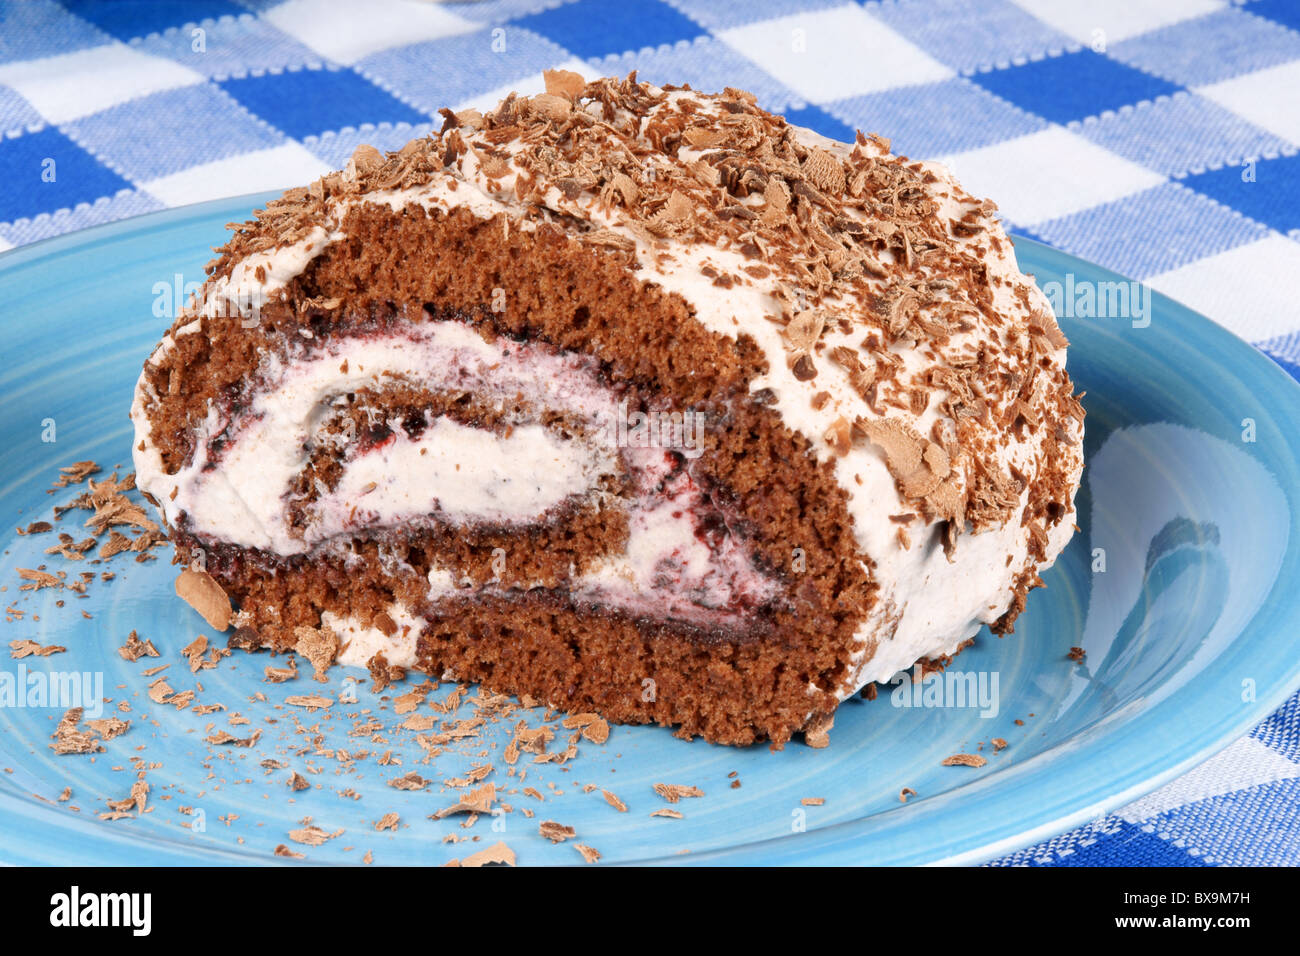 Chocolate swiss roll cake with berries marmalade and whipped cream over a chequered background Stock Photo